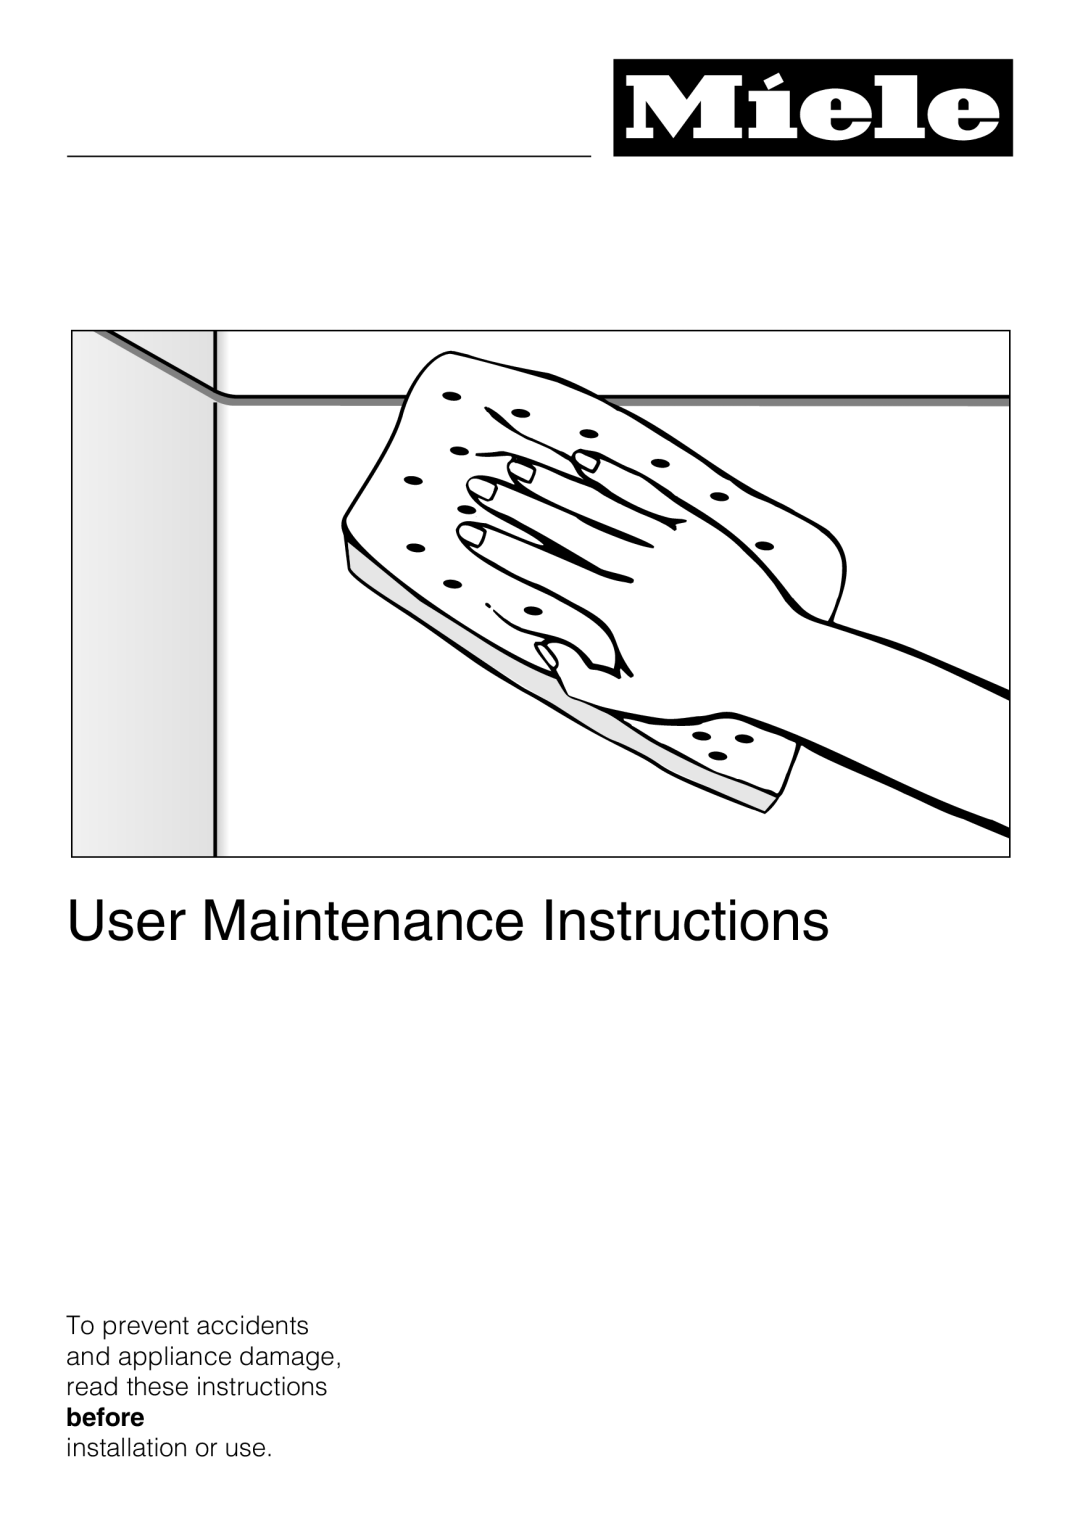 Miele G 5575, G 5570 manual User Maintenance Instructions, installation or use 